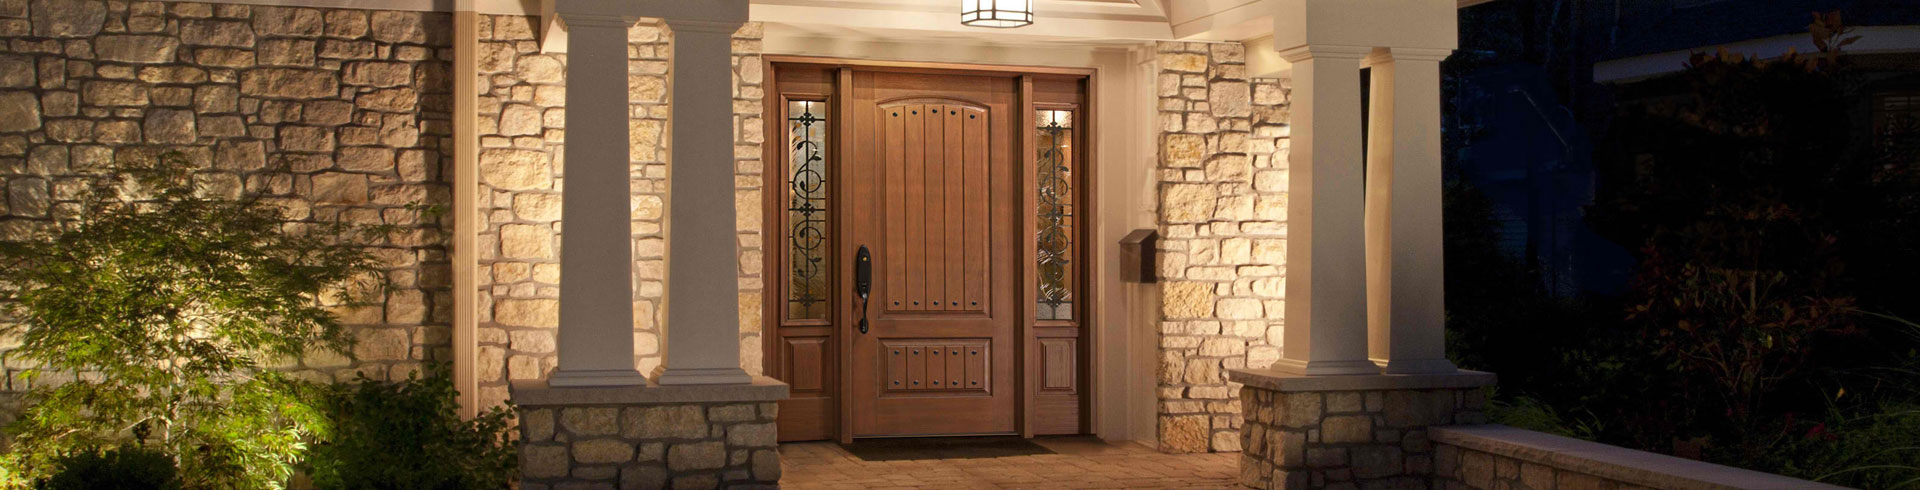 <h1>Front Doors</h1><p>The Front Door makes a big statement about your home. It should not only look attractive, but also be practical and long lasting.  <a href='doors.html'>Learn More ></a></p>